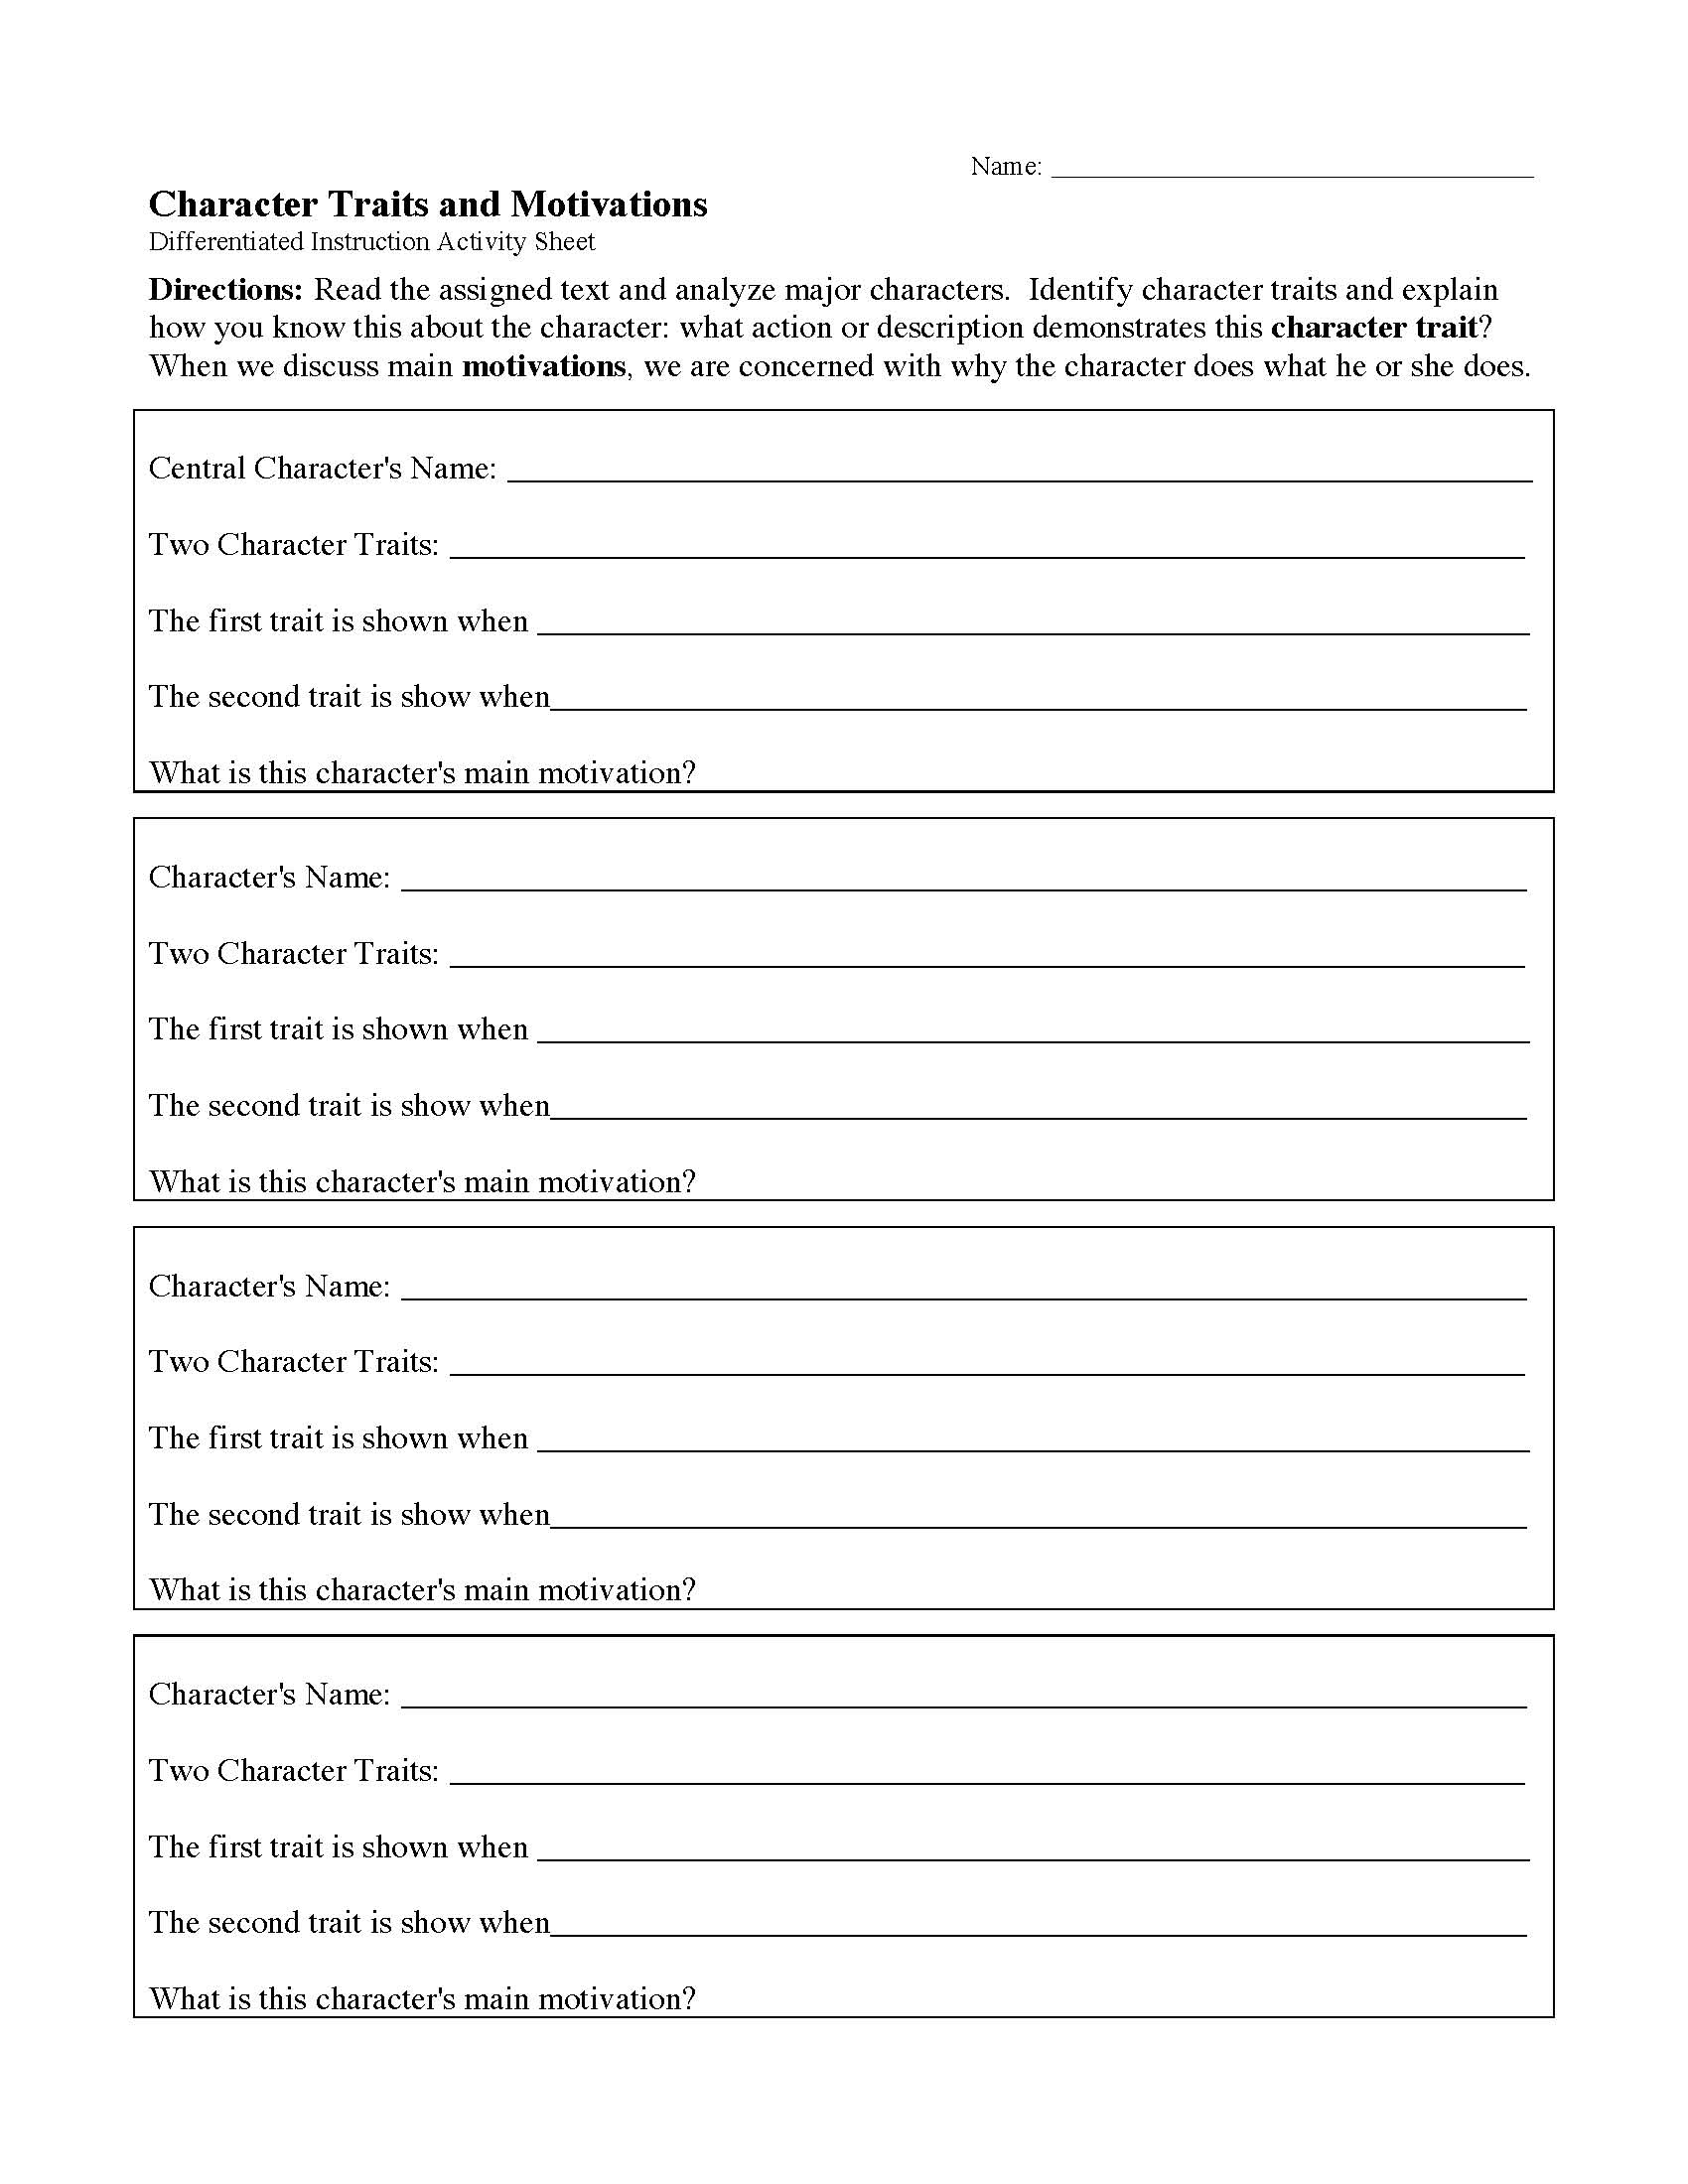 character-traits-and-motivations-worksheet-preview